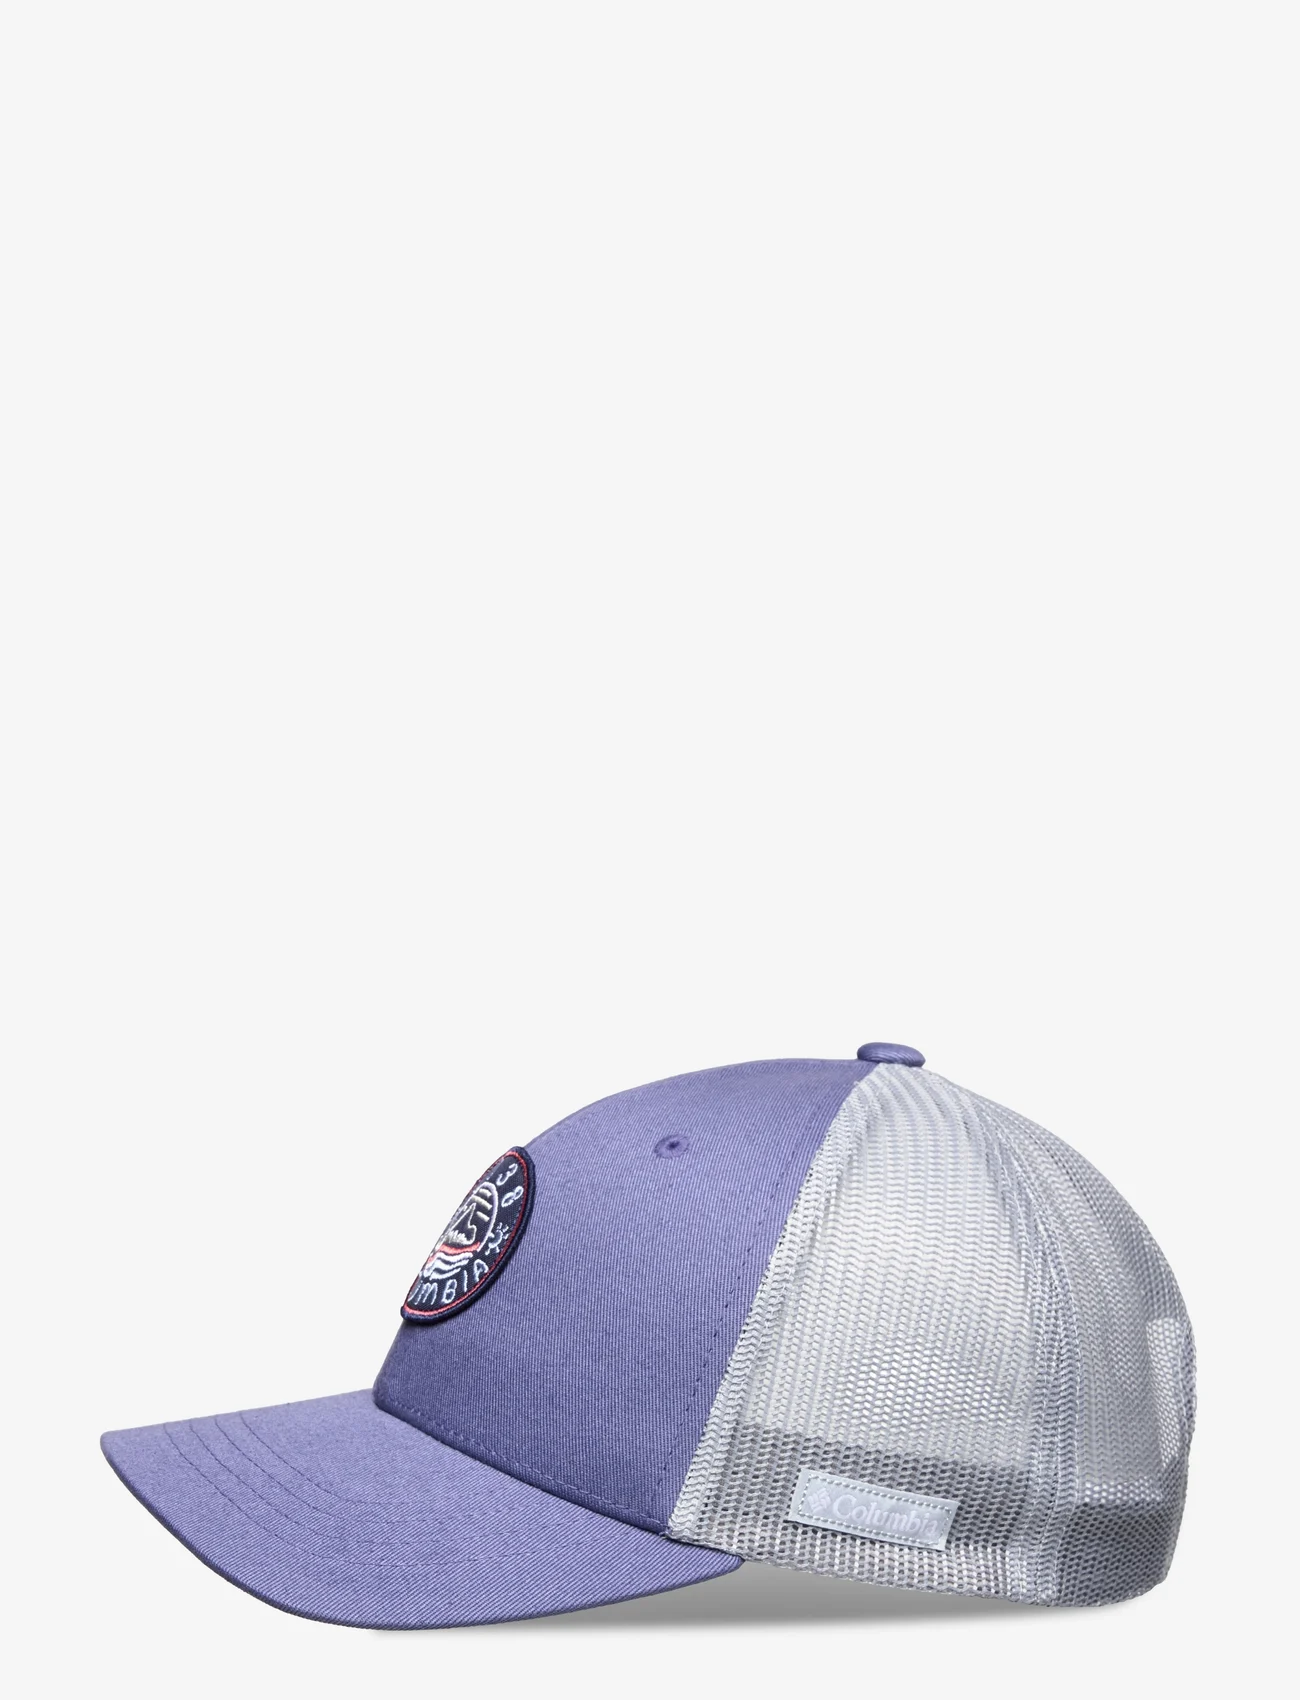 Columbia Sportswear - Columbia Youth Snap Back - sommerschnäppchen - eve, cirrus grey, hot marker waves - 1